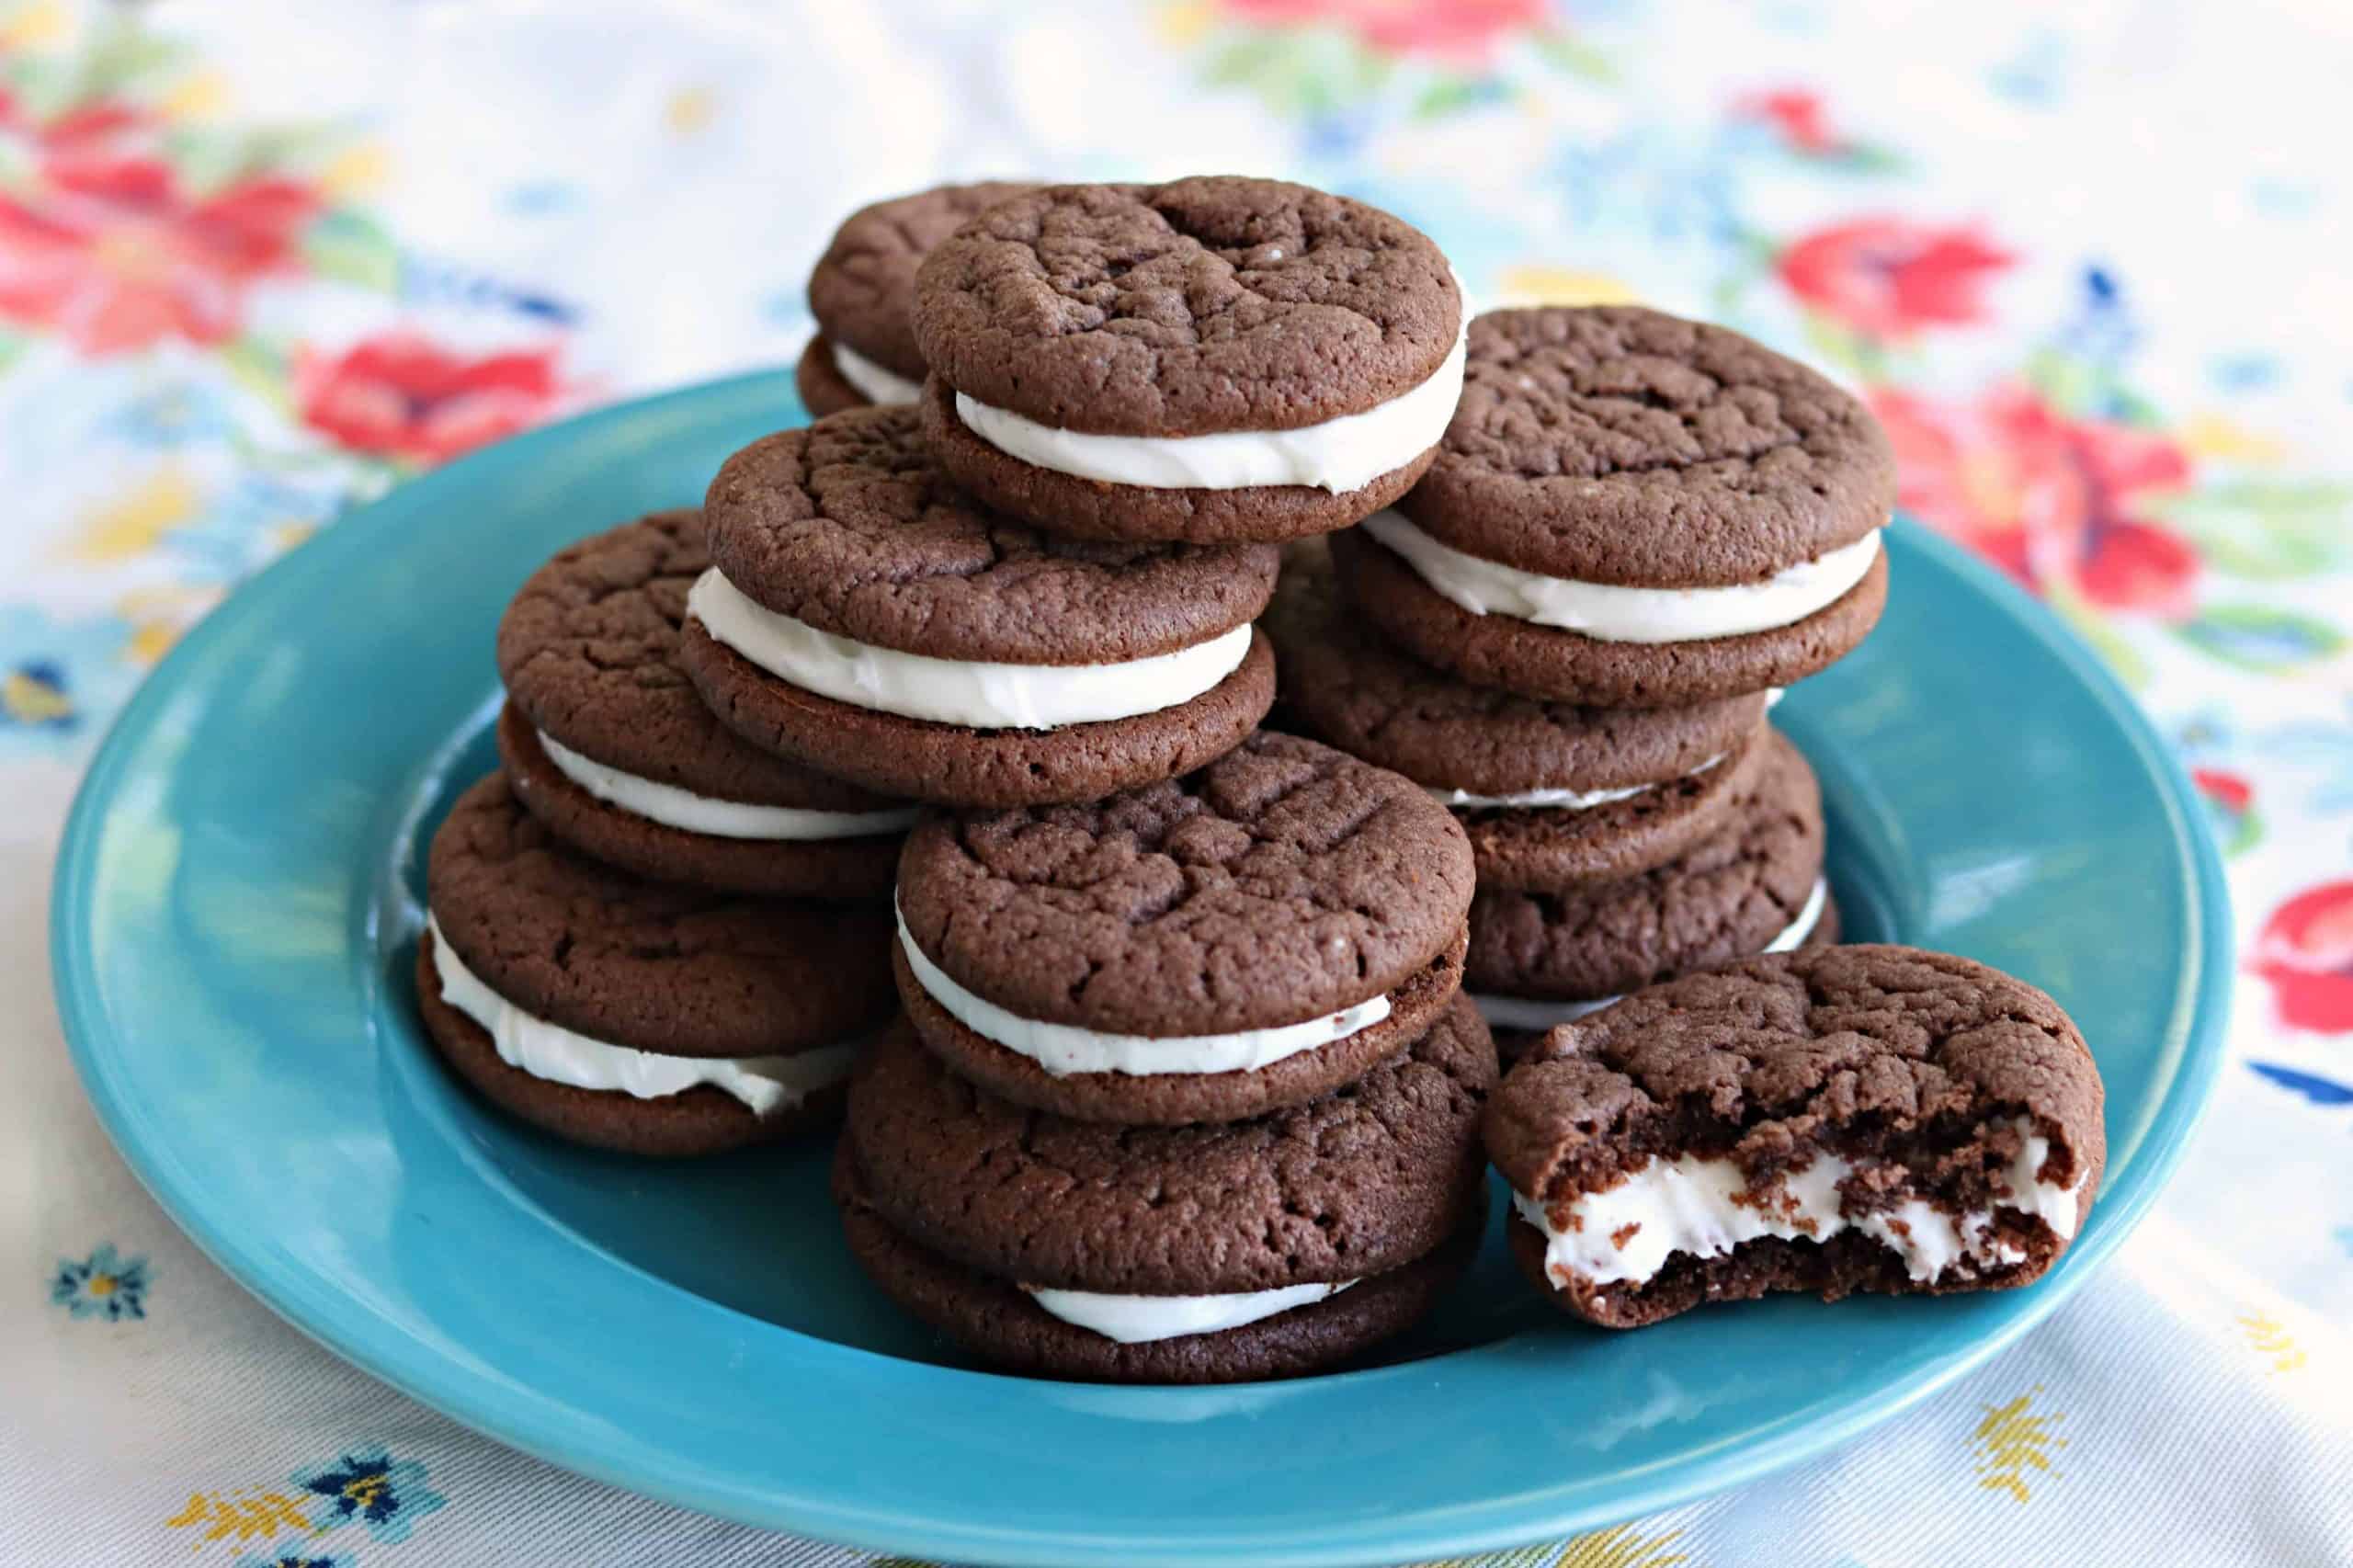 Recipe for Whoopie Pies with Cream Cheese Filling